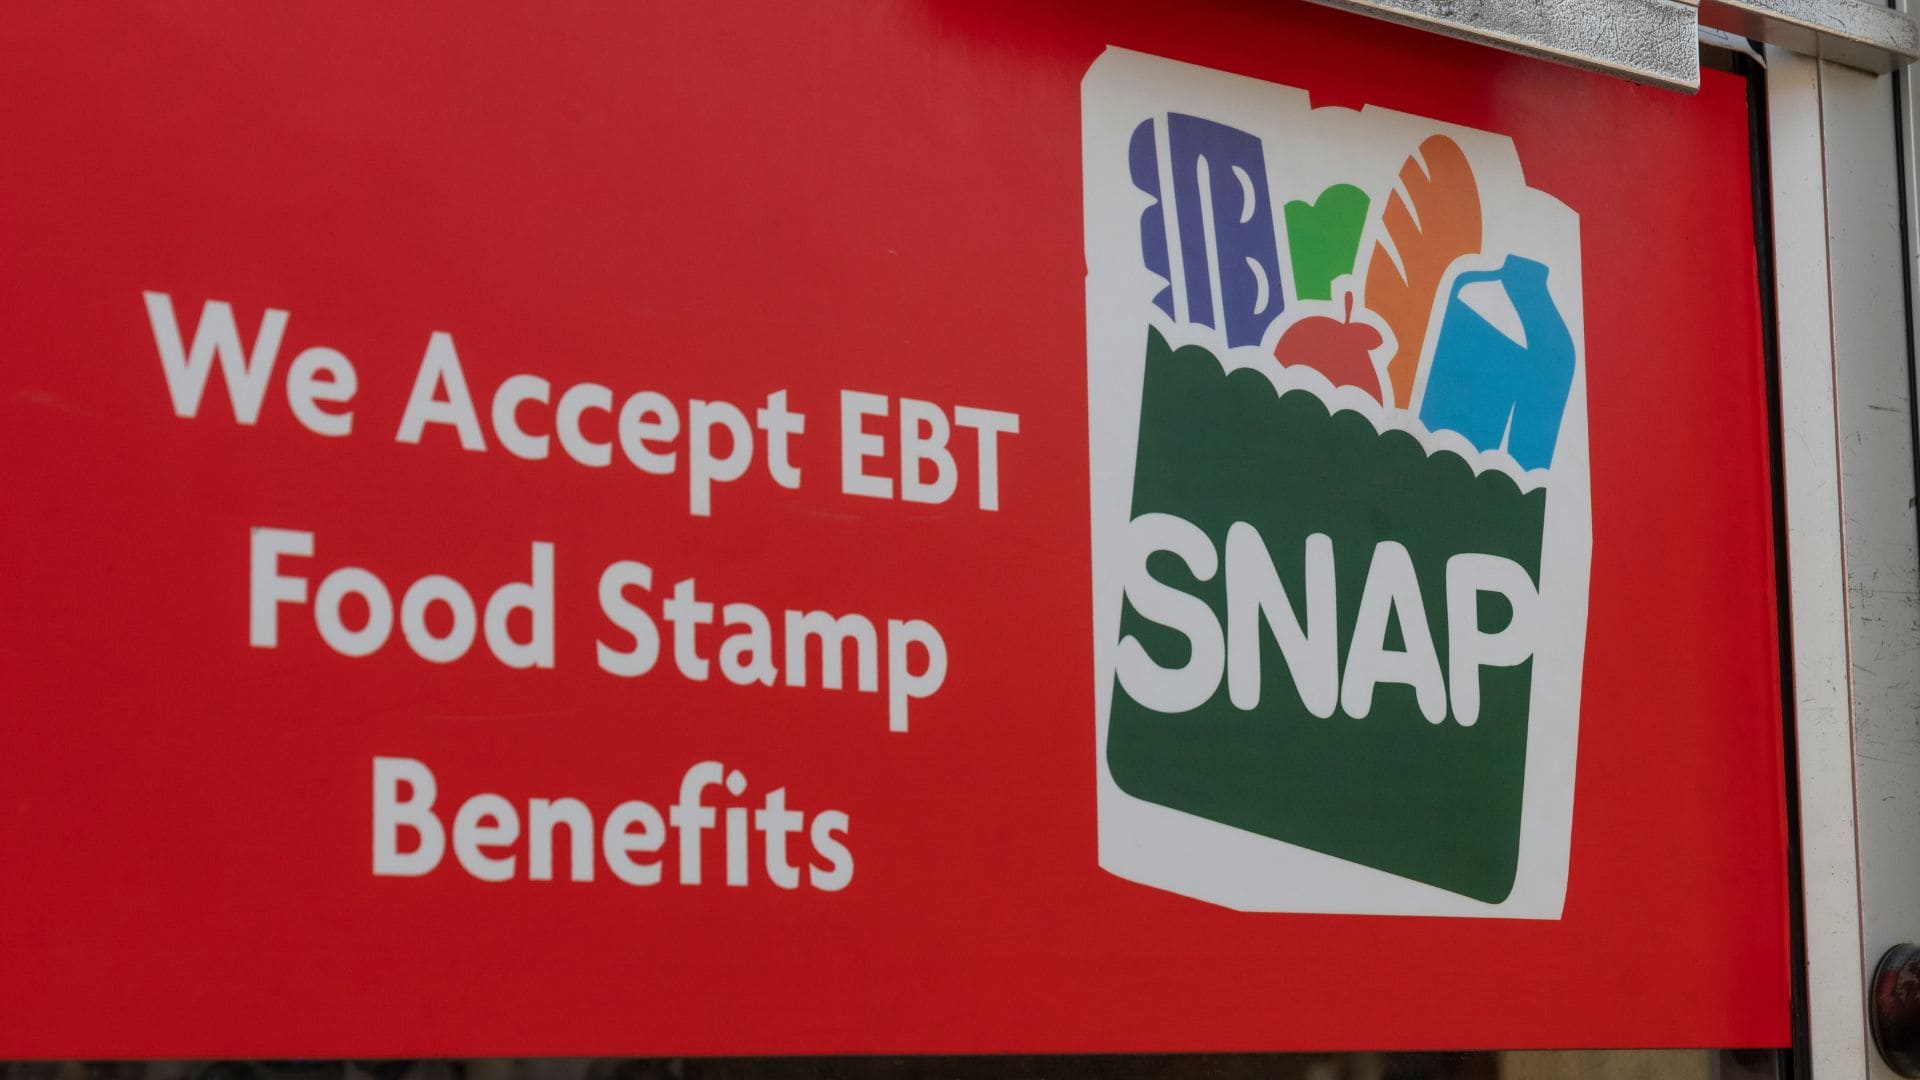 You cannot buy everything with your EBT card SNAP food Stamps money